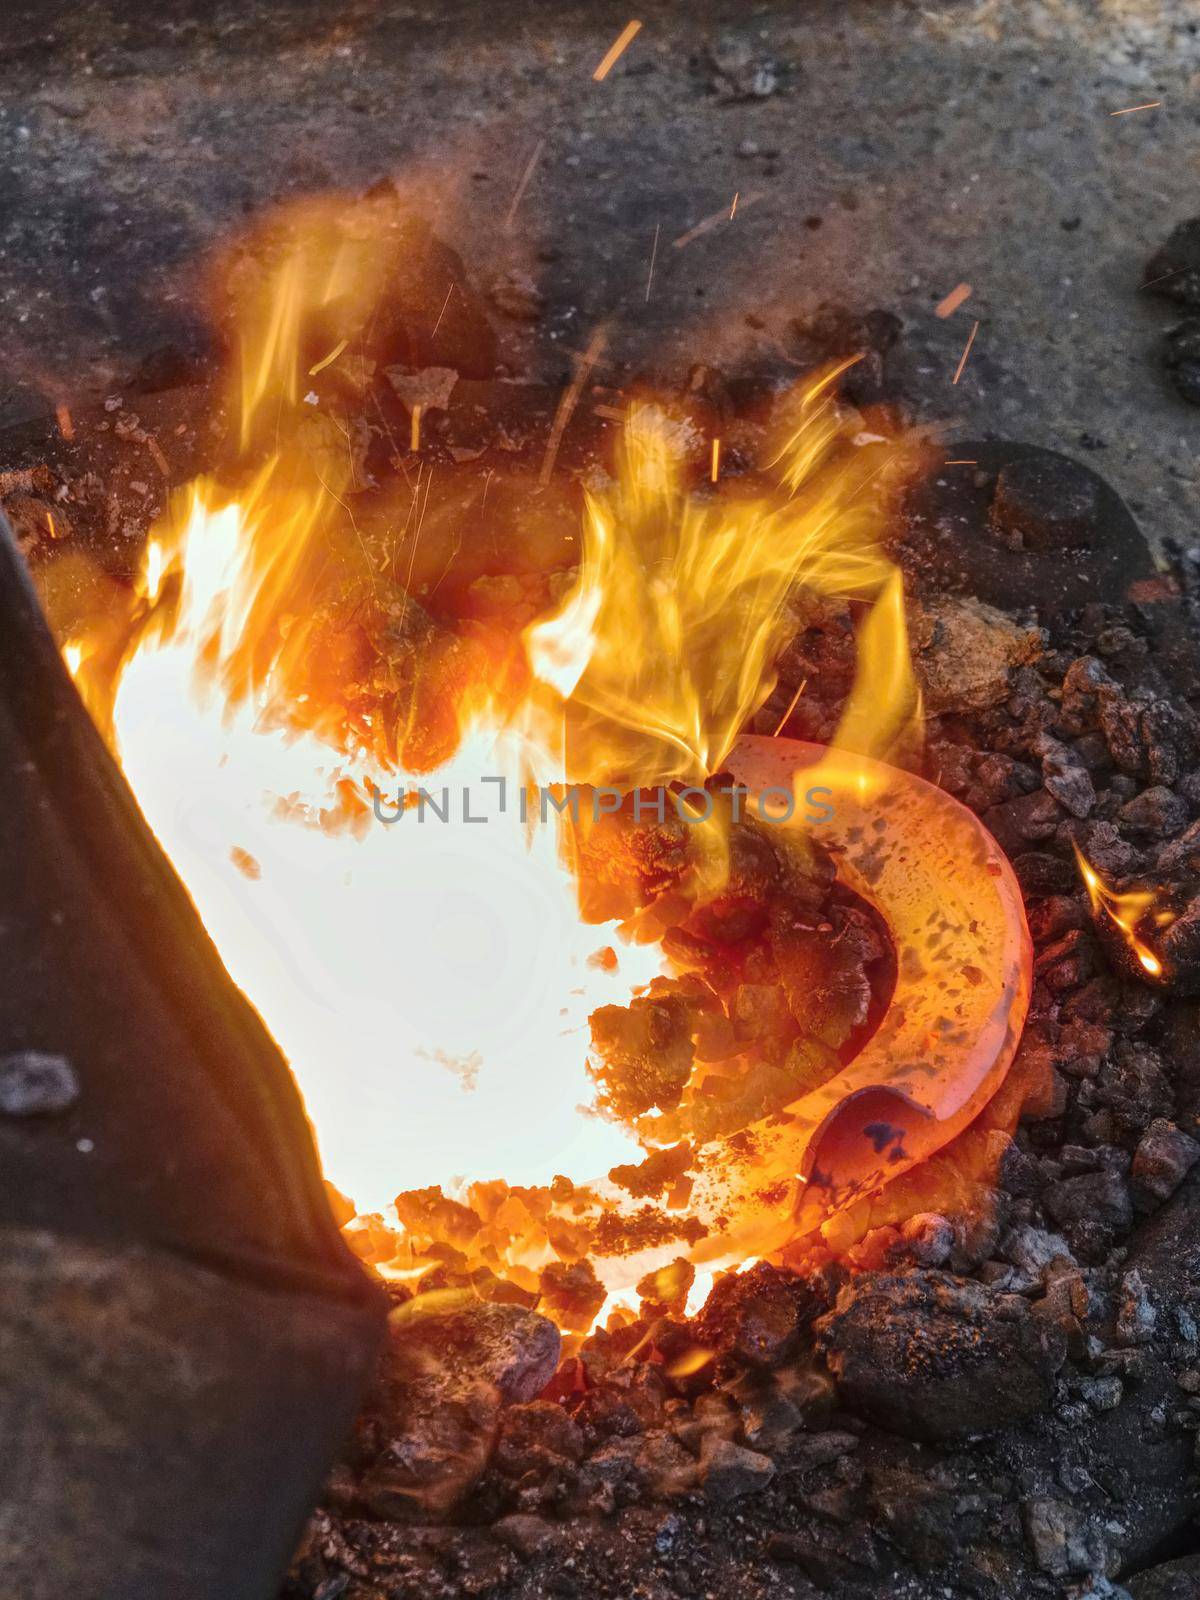 Warming iron in fire to create  horseshoe on abvil by rdonar2